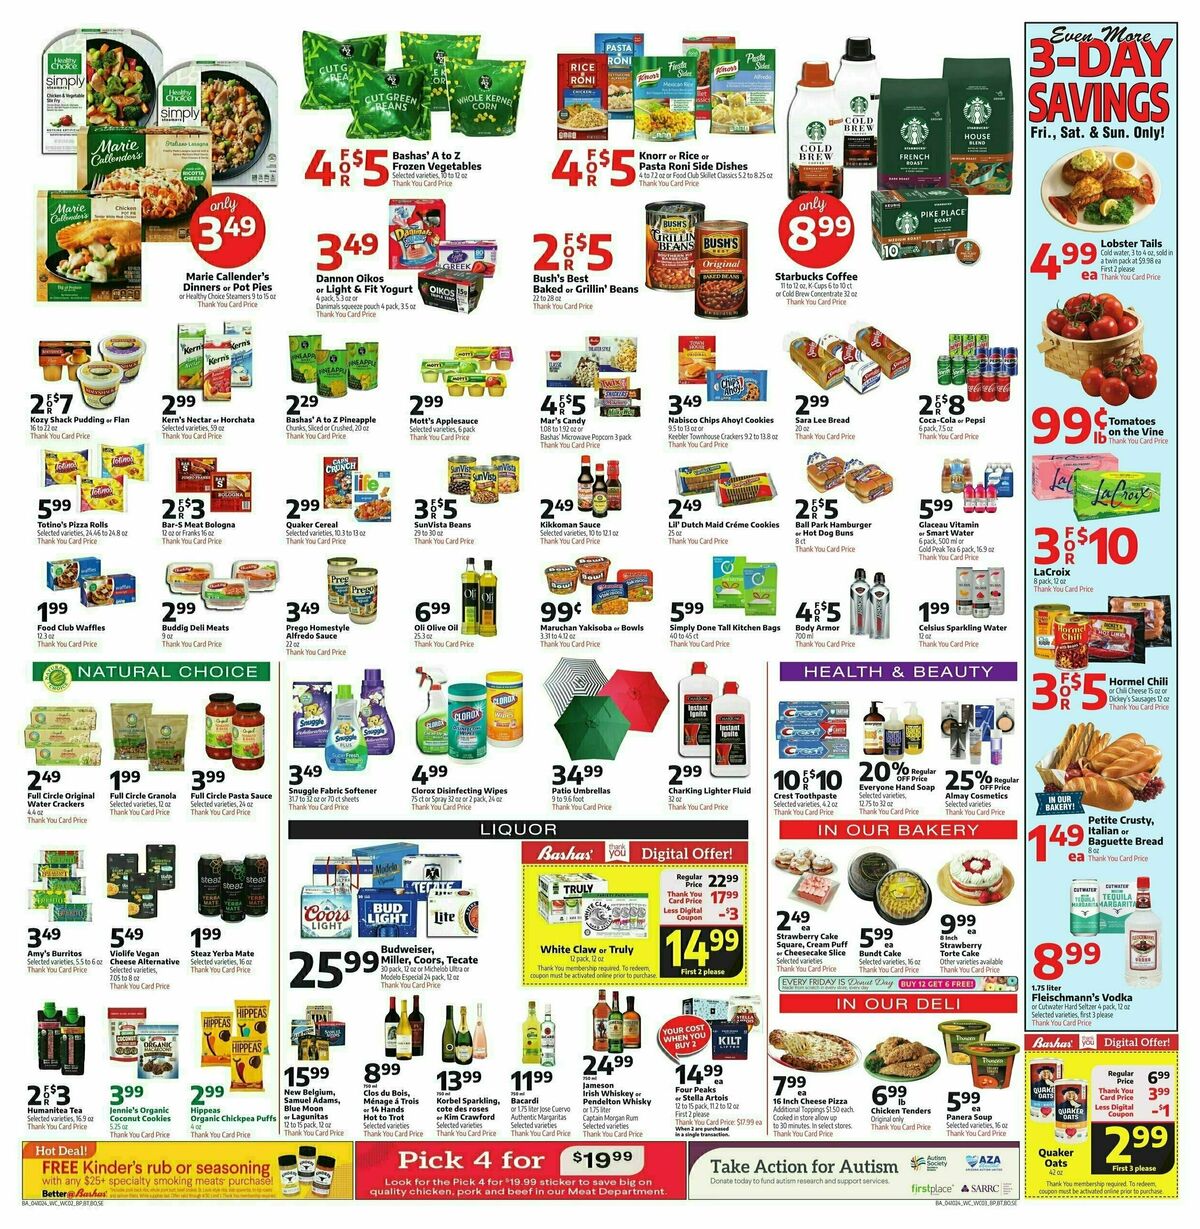 Bashas Weekly Ad from April 10